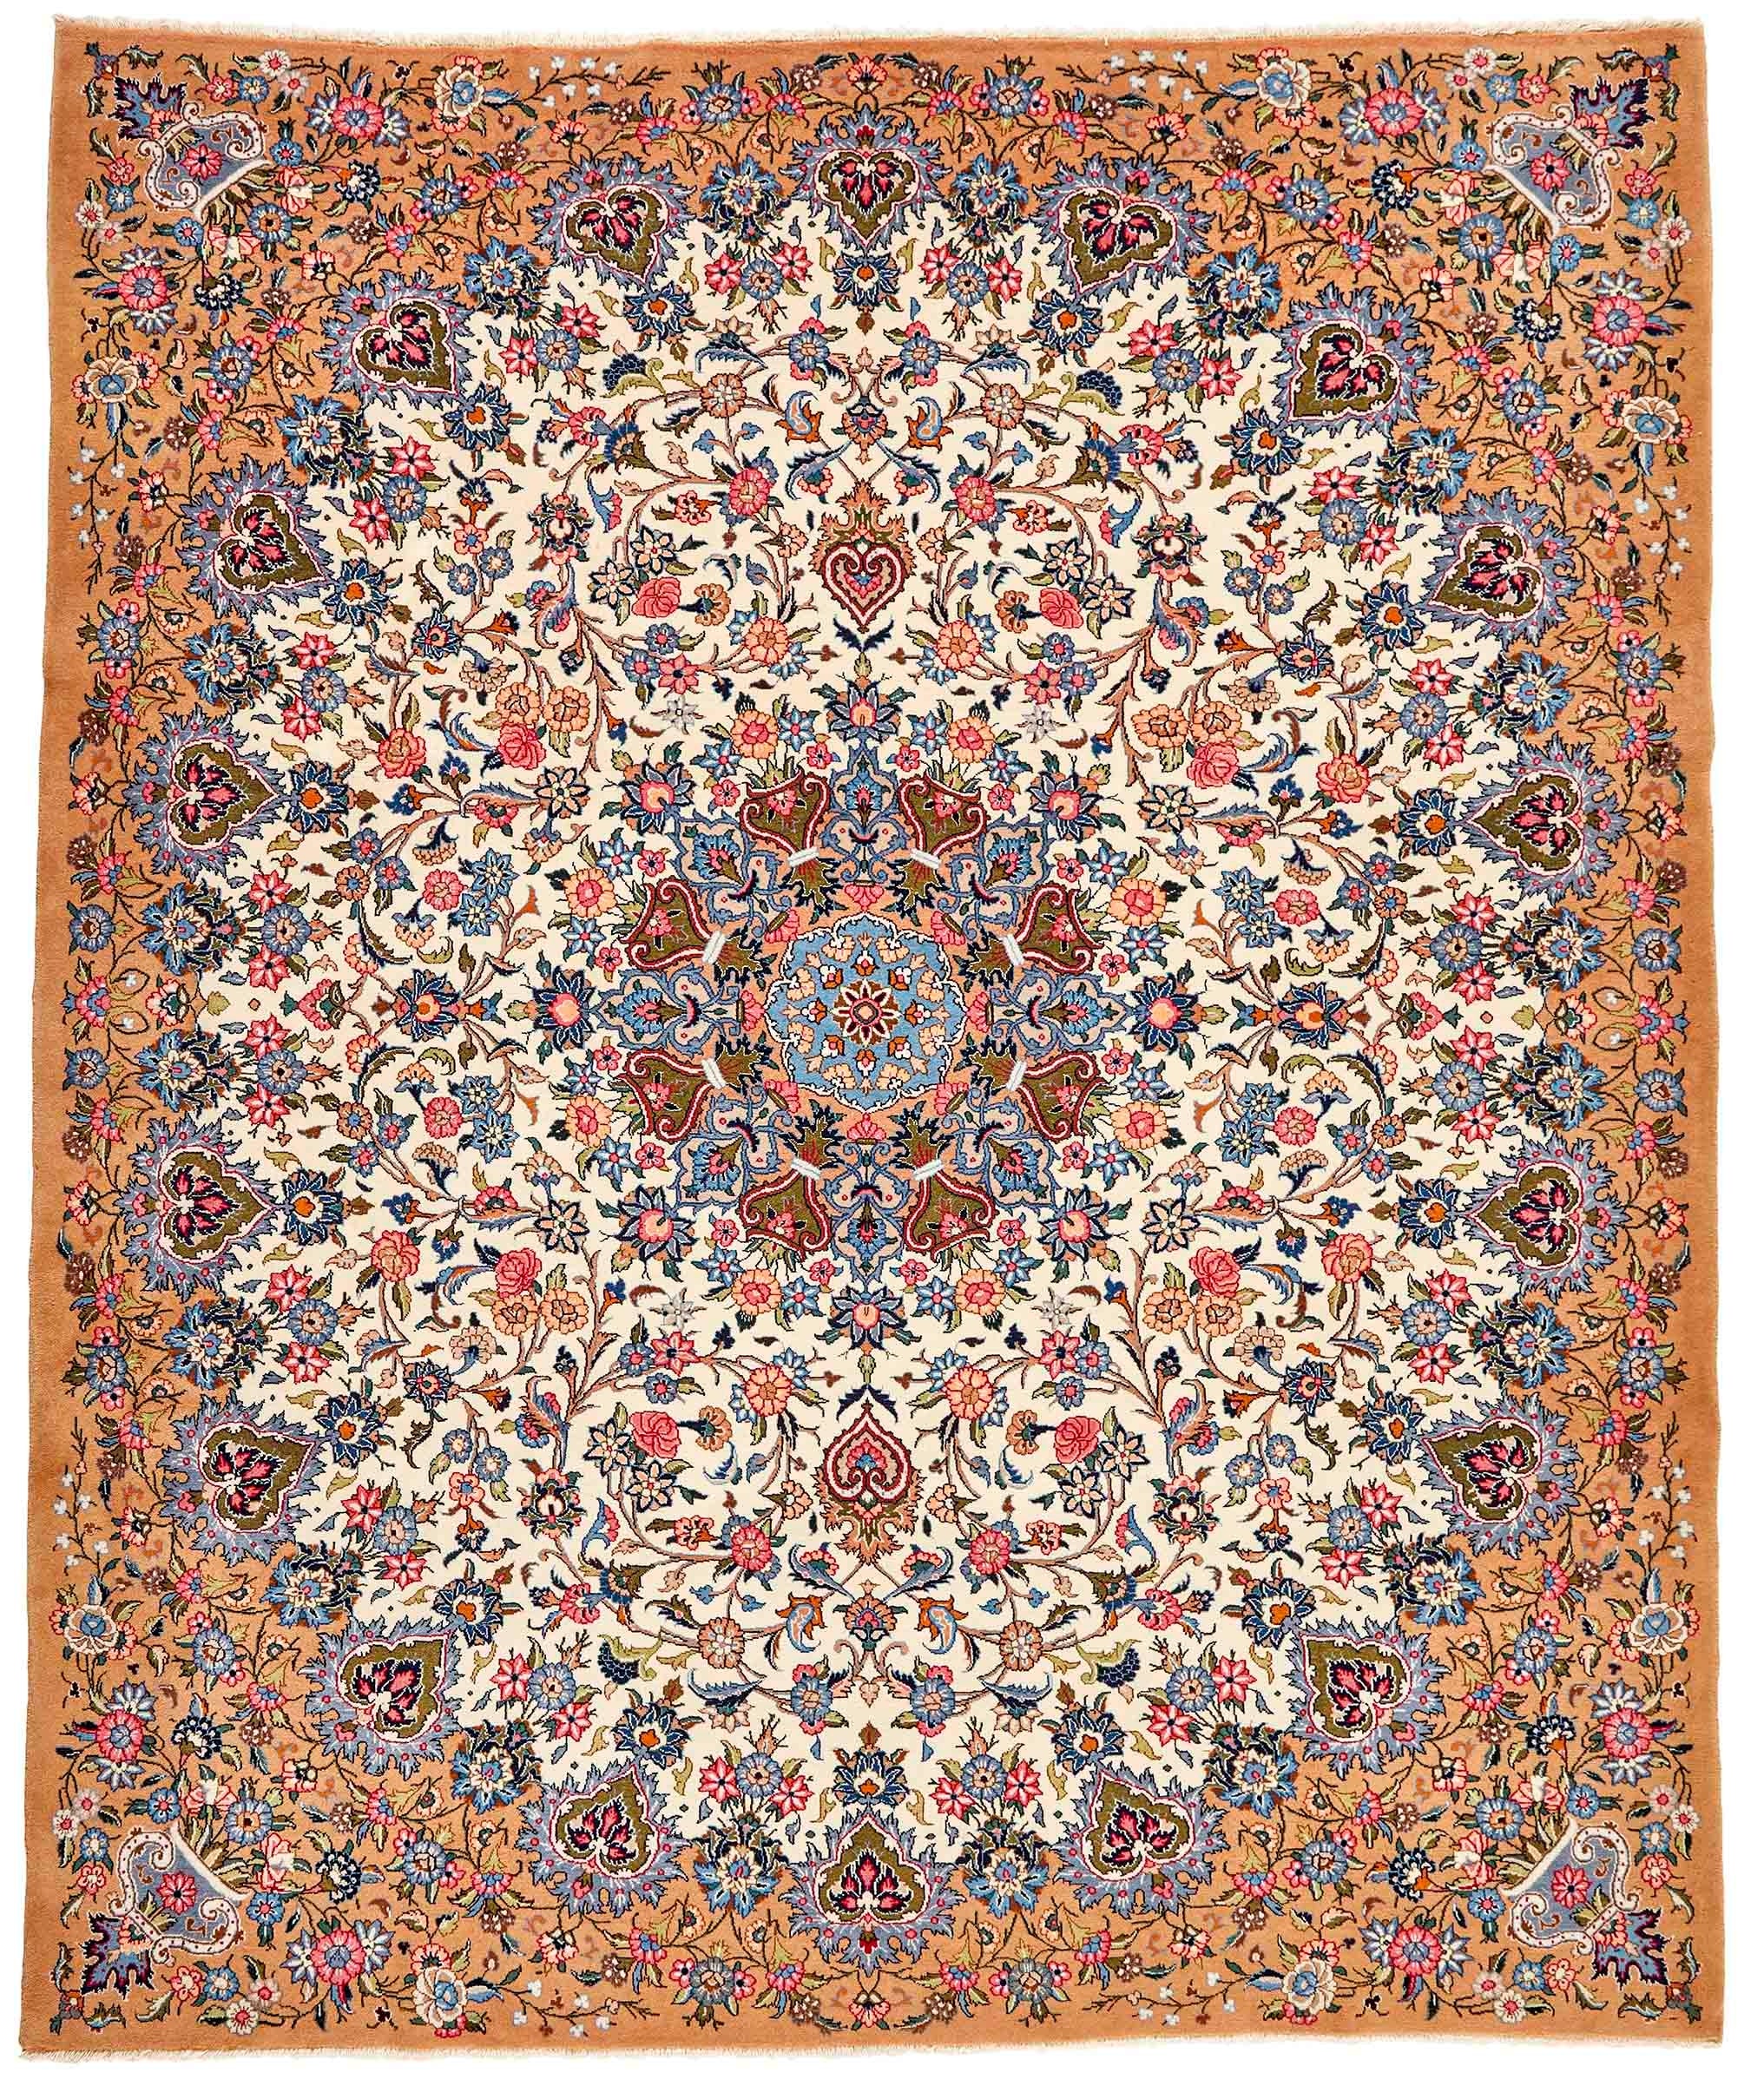 Authentic persian rug with traditional floral design in orange and blue